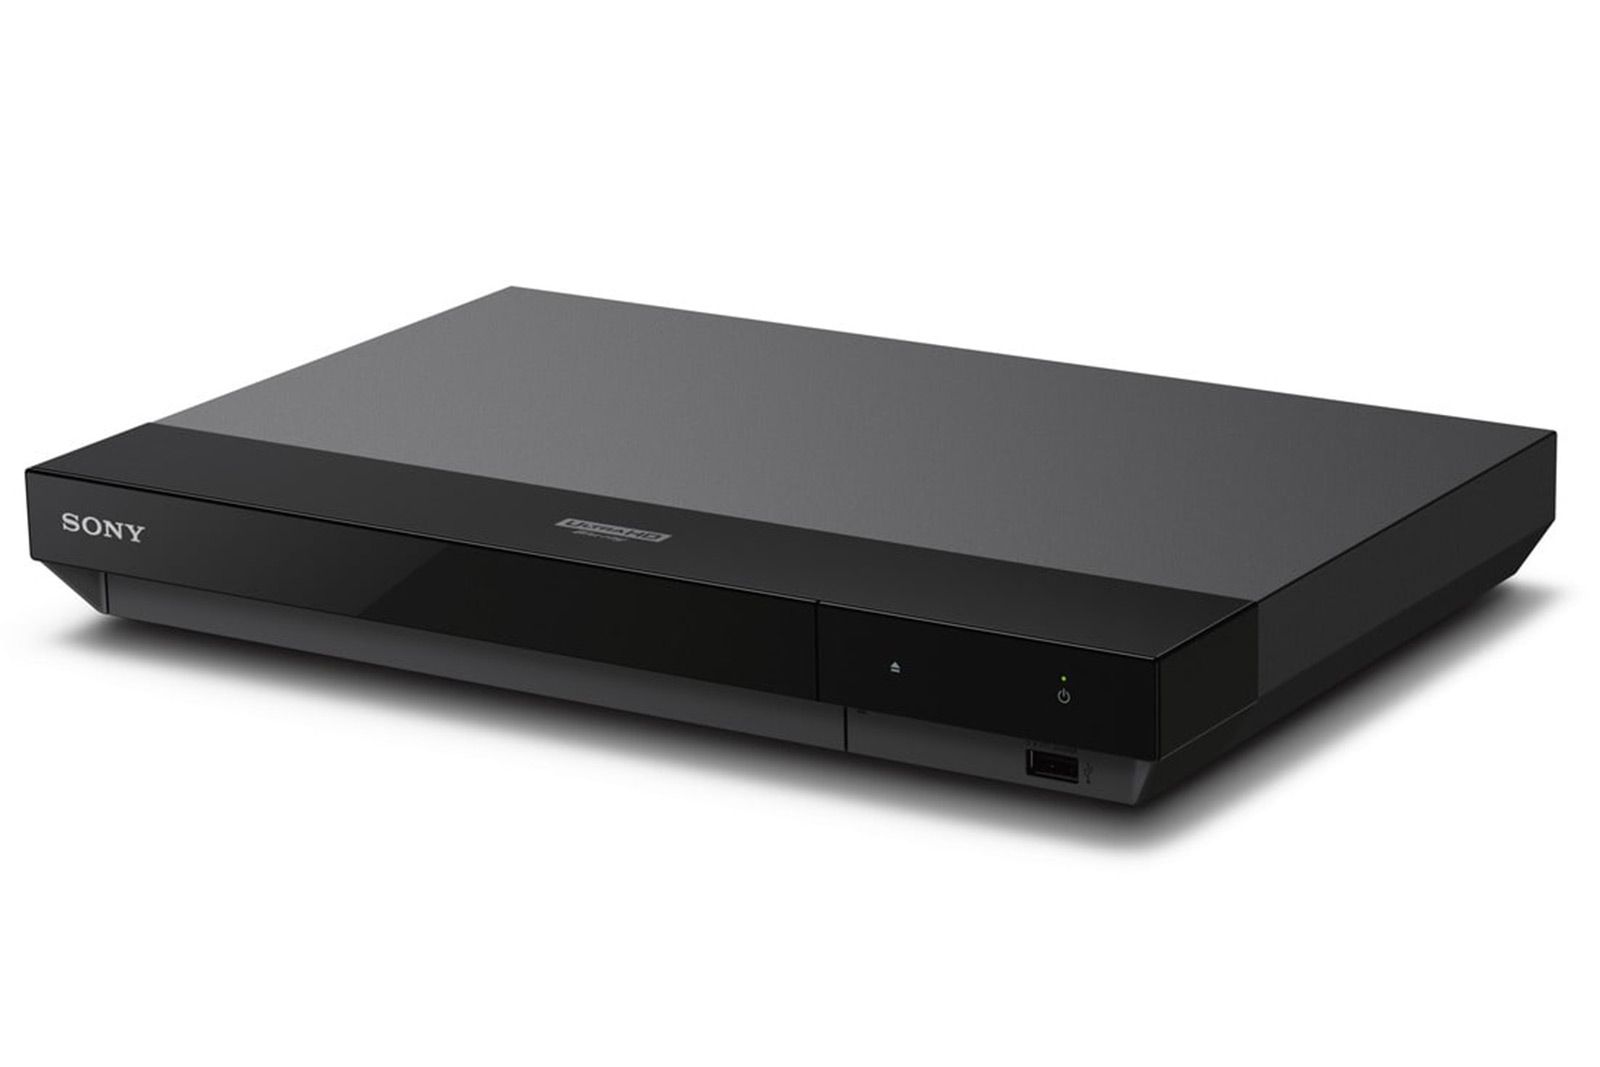 Sony UBP-X700 is the companys first 4K Blu-ray player with Dolby Vision support image 1